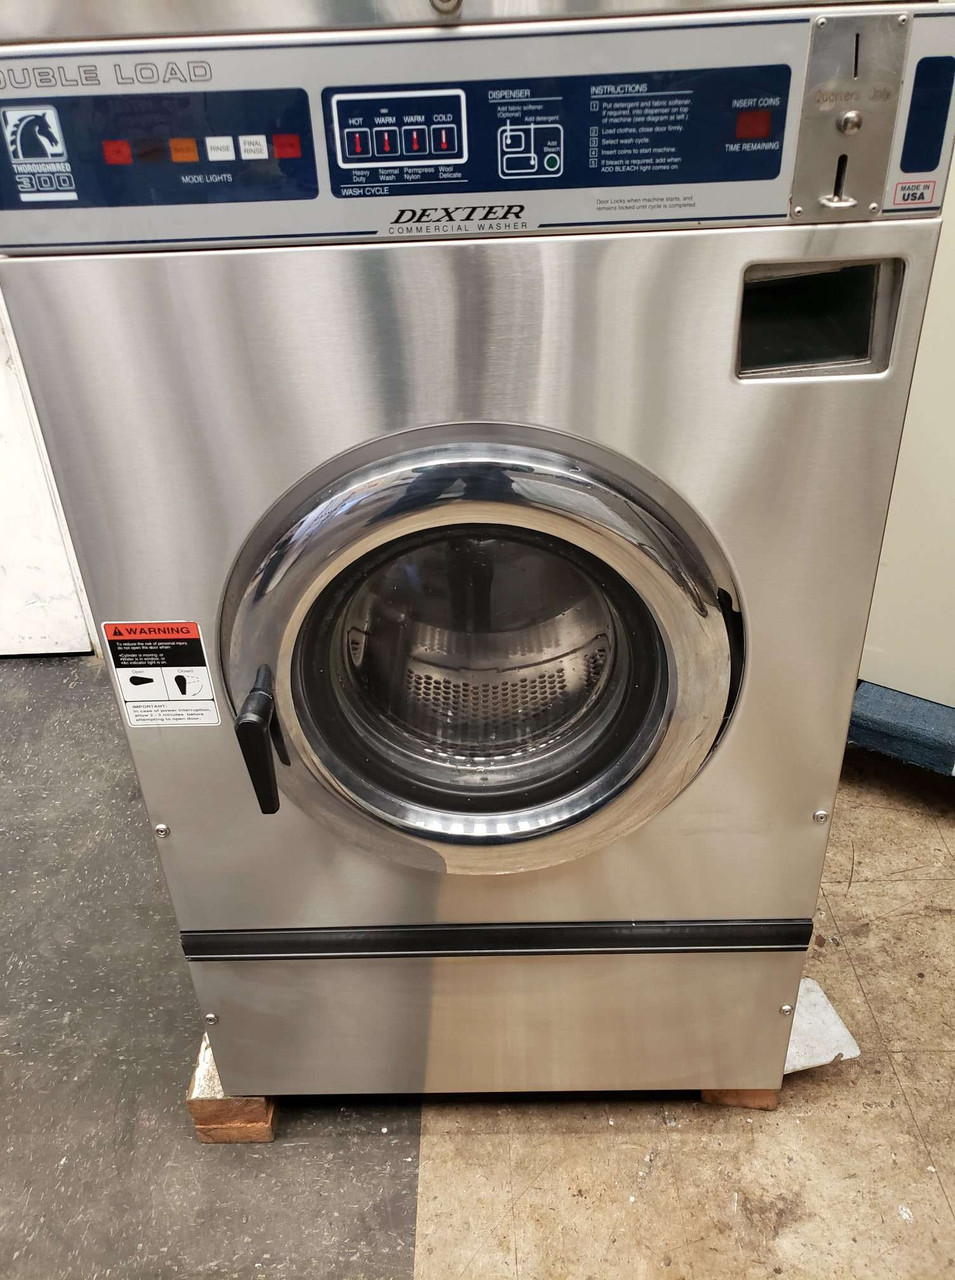 DEXTER T-300 COMMERCIAL FRONT LOAD WASHING MACHINE, 18 LBS CAPACITY MODEL:  WCN18AASS SERIAL NO: 20009000436425